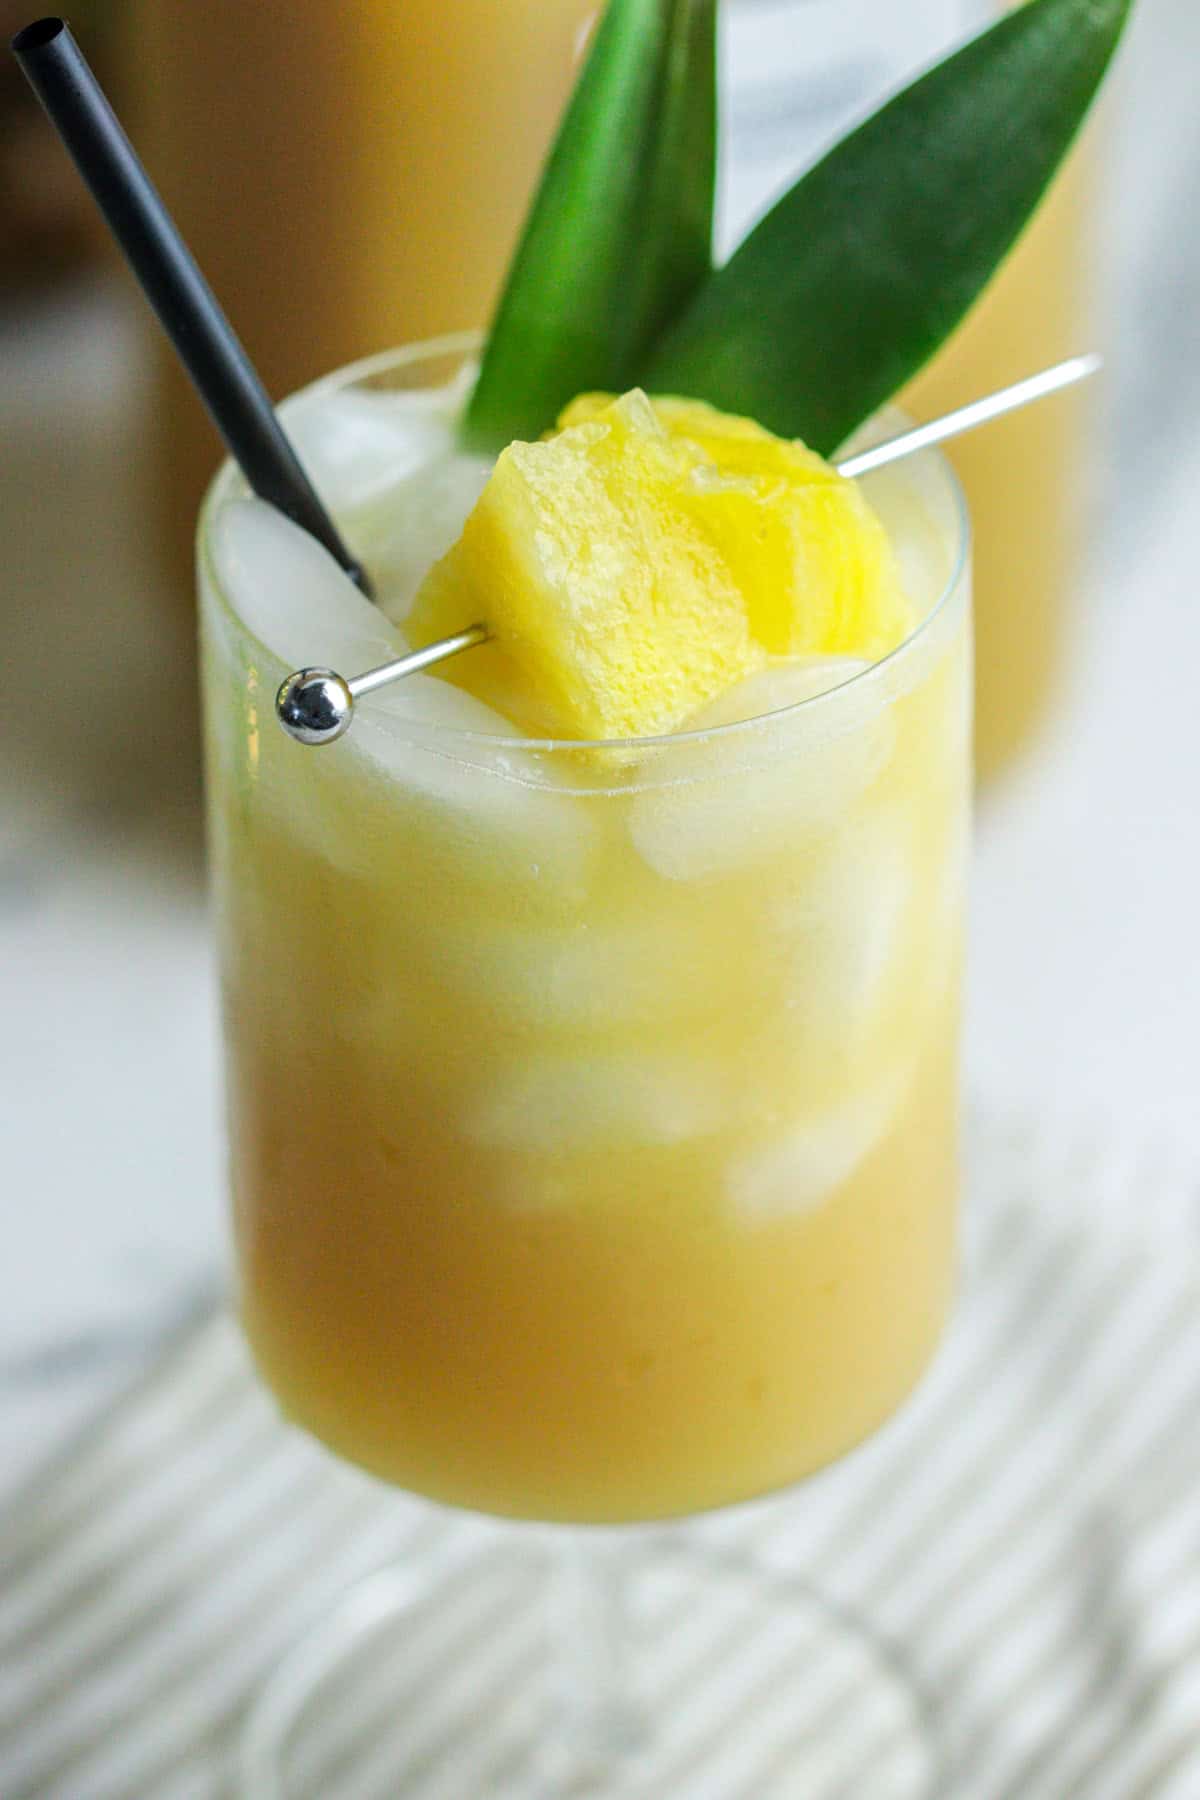 Pineapple coconut drink in a glass with straw.